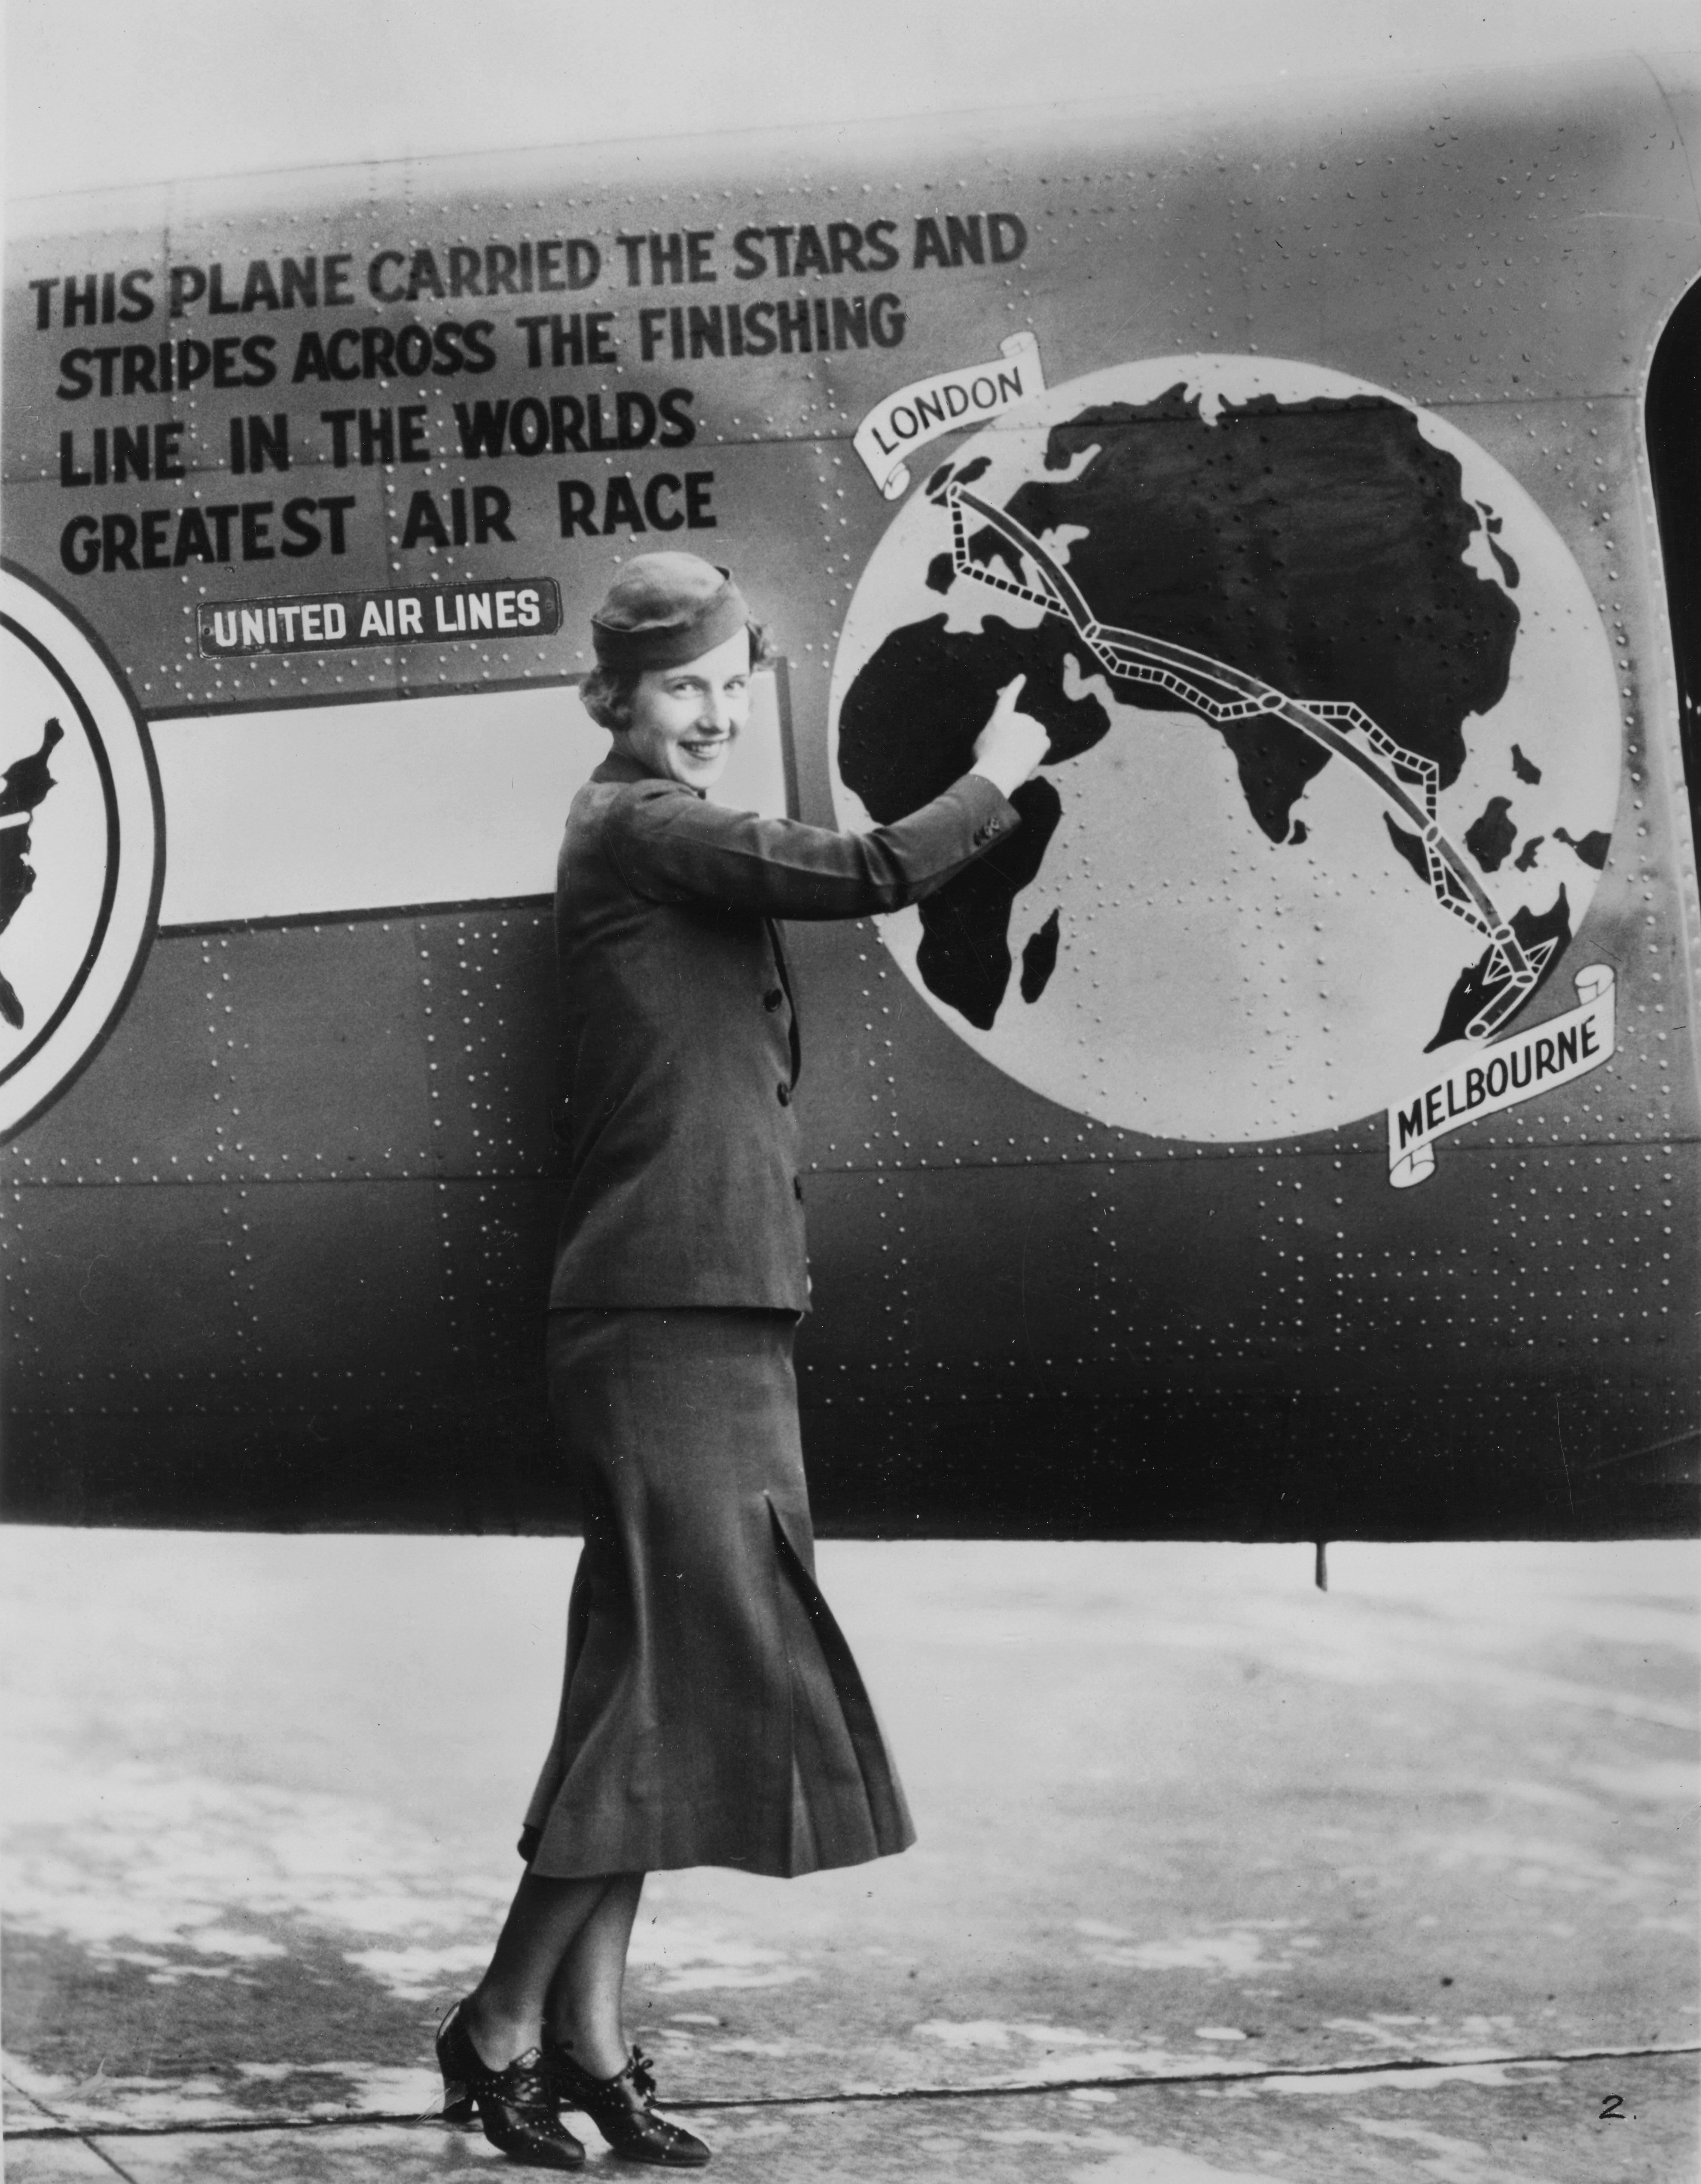 Black and white photograph of a woman in a stewardess uniform standing in front of a decorated airplane body. Plane body shows a globe with directional markers running from London to Melbourne.